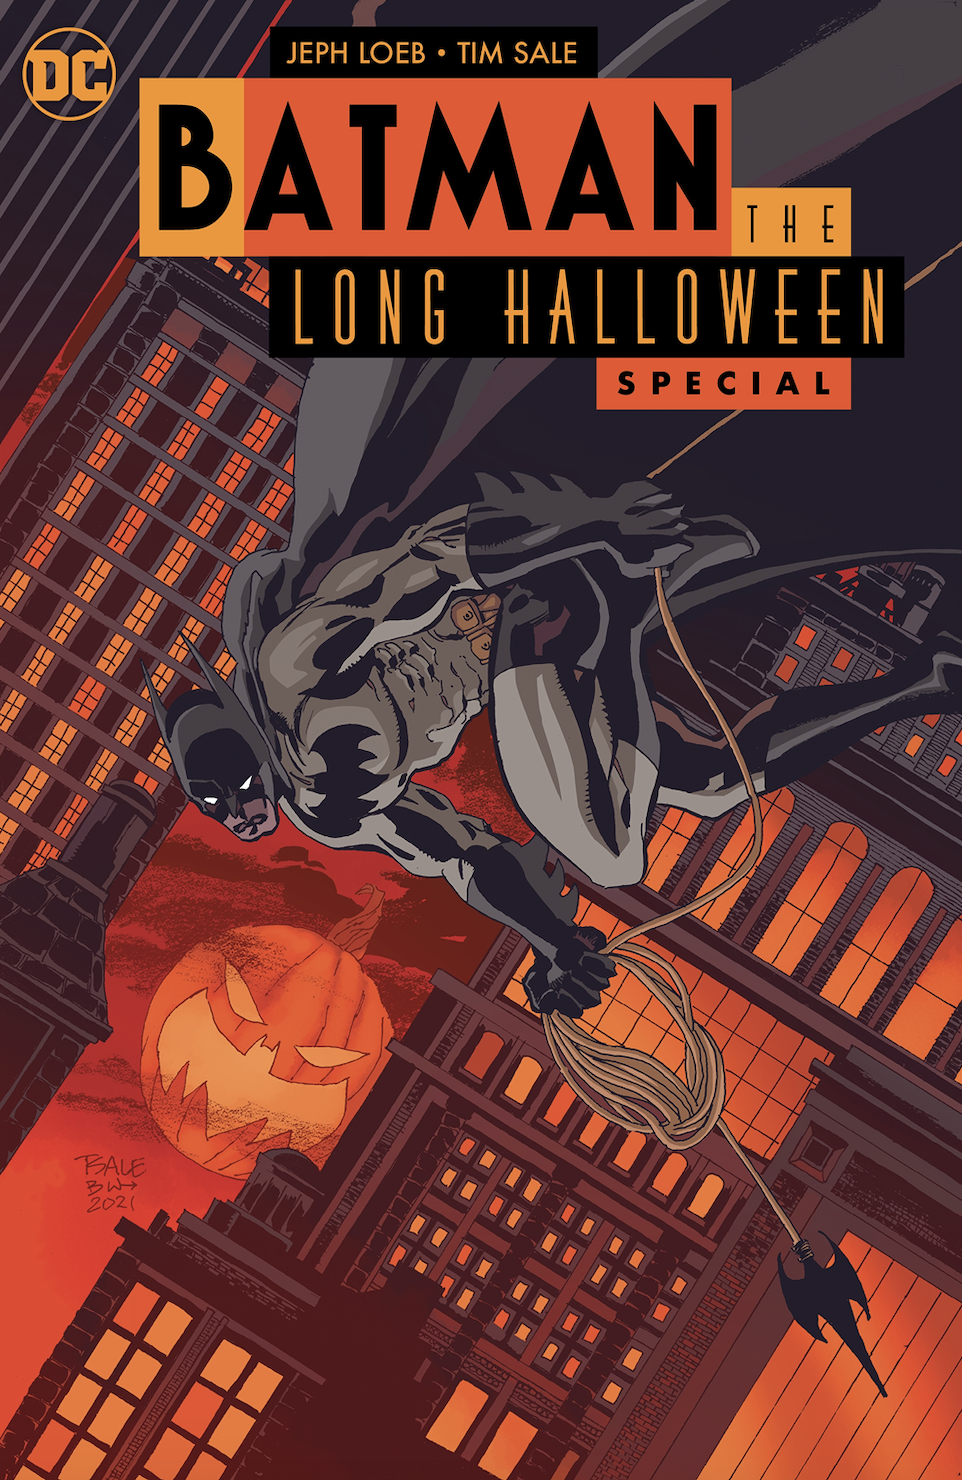 Batman the Long Halloween Special #1 (One Shot) Cover A Tim Sale